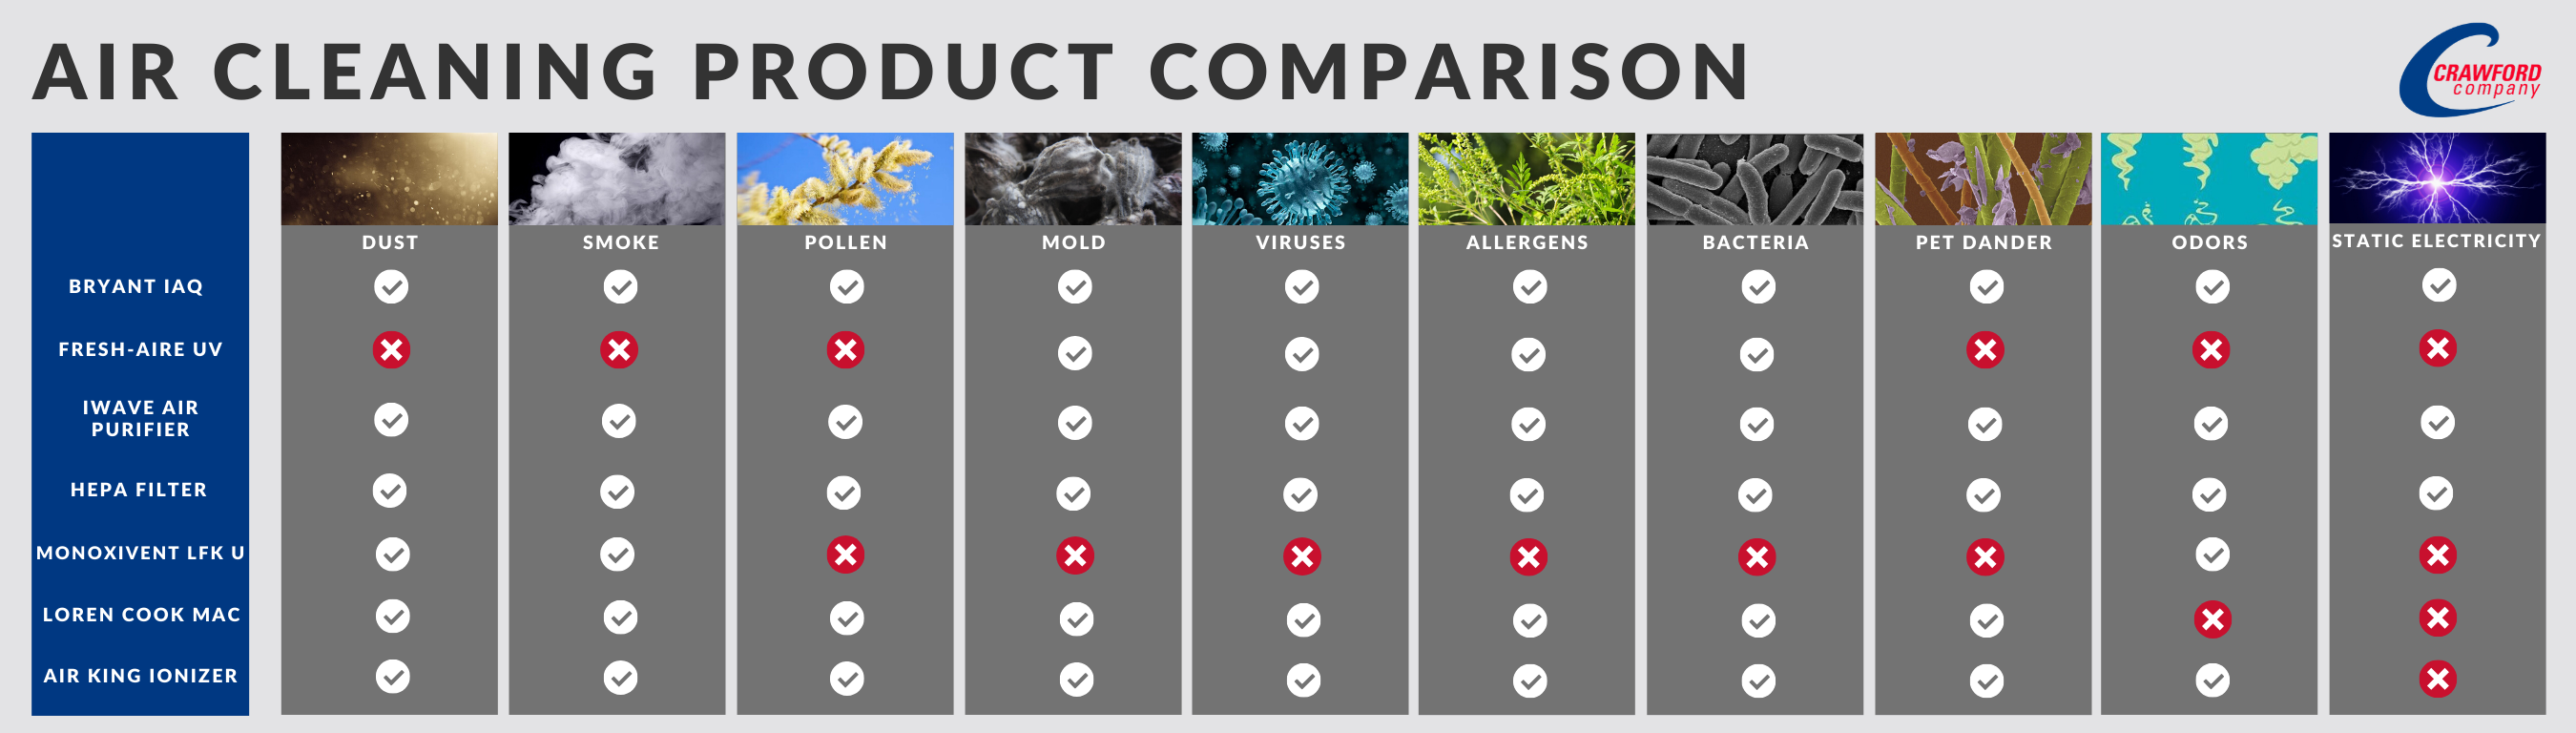 Air cleaning product comparison table